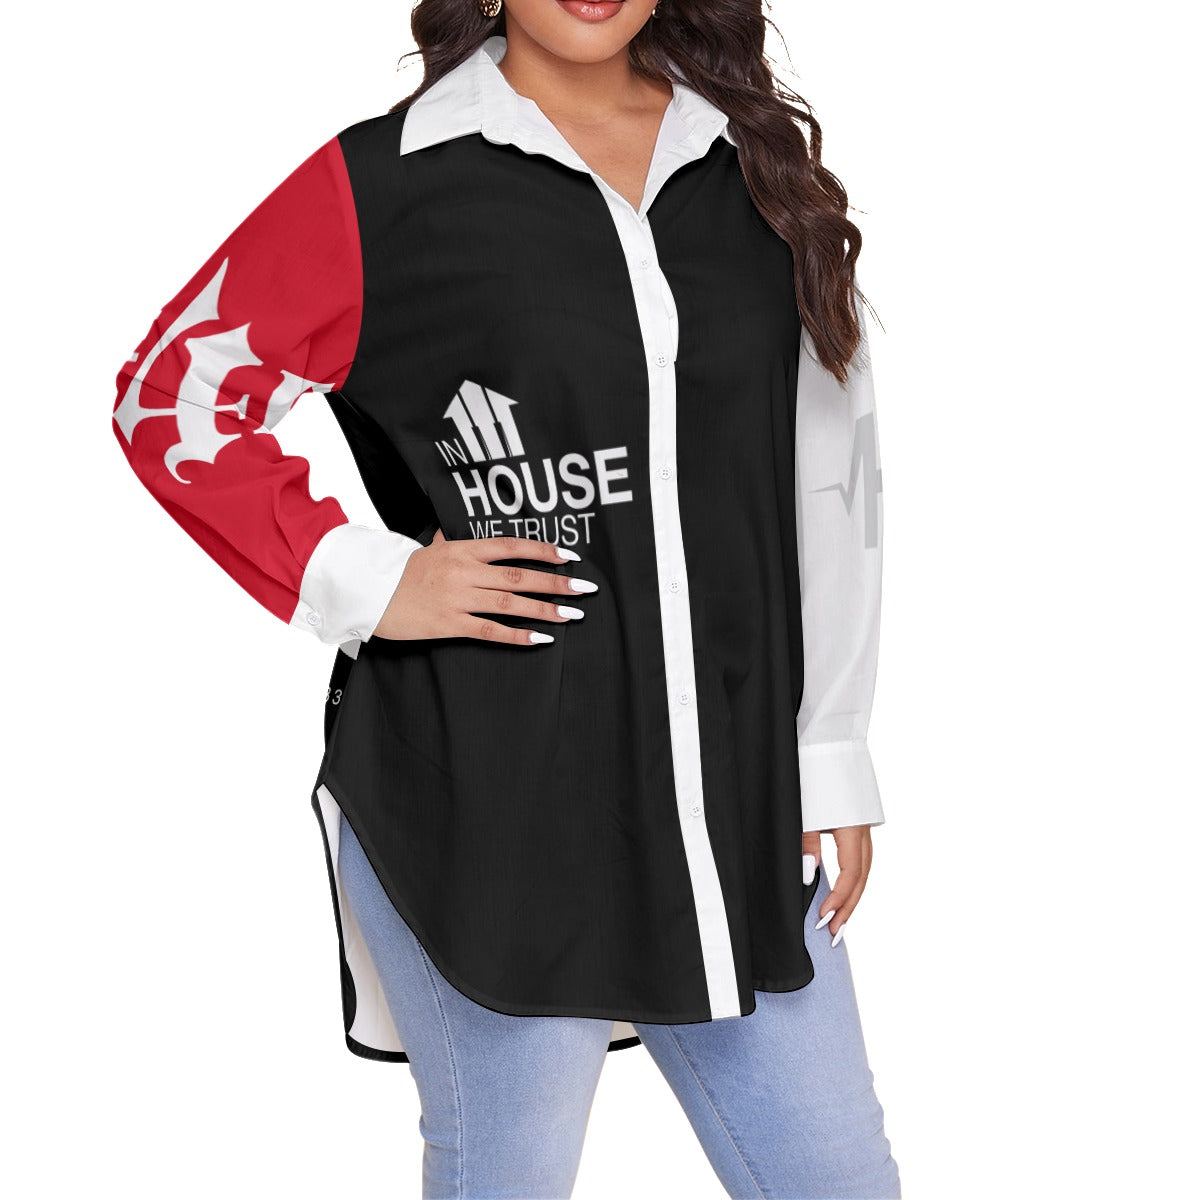 In House we Trust Women's Shirt With Long Sleeve(Plus Size)